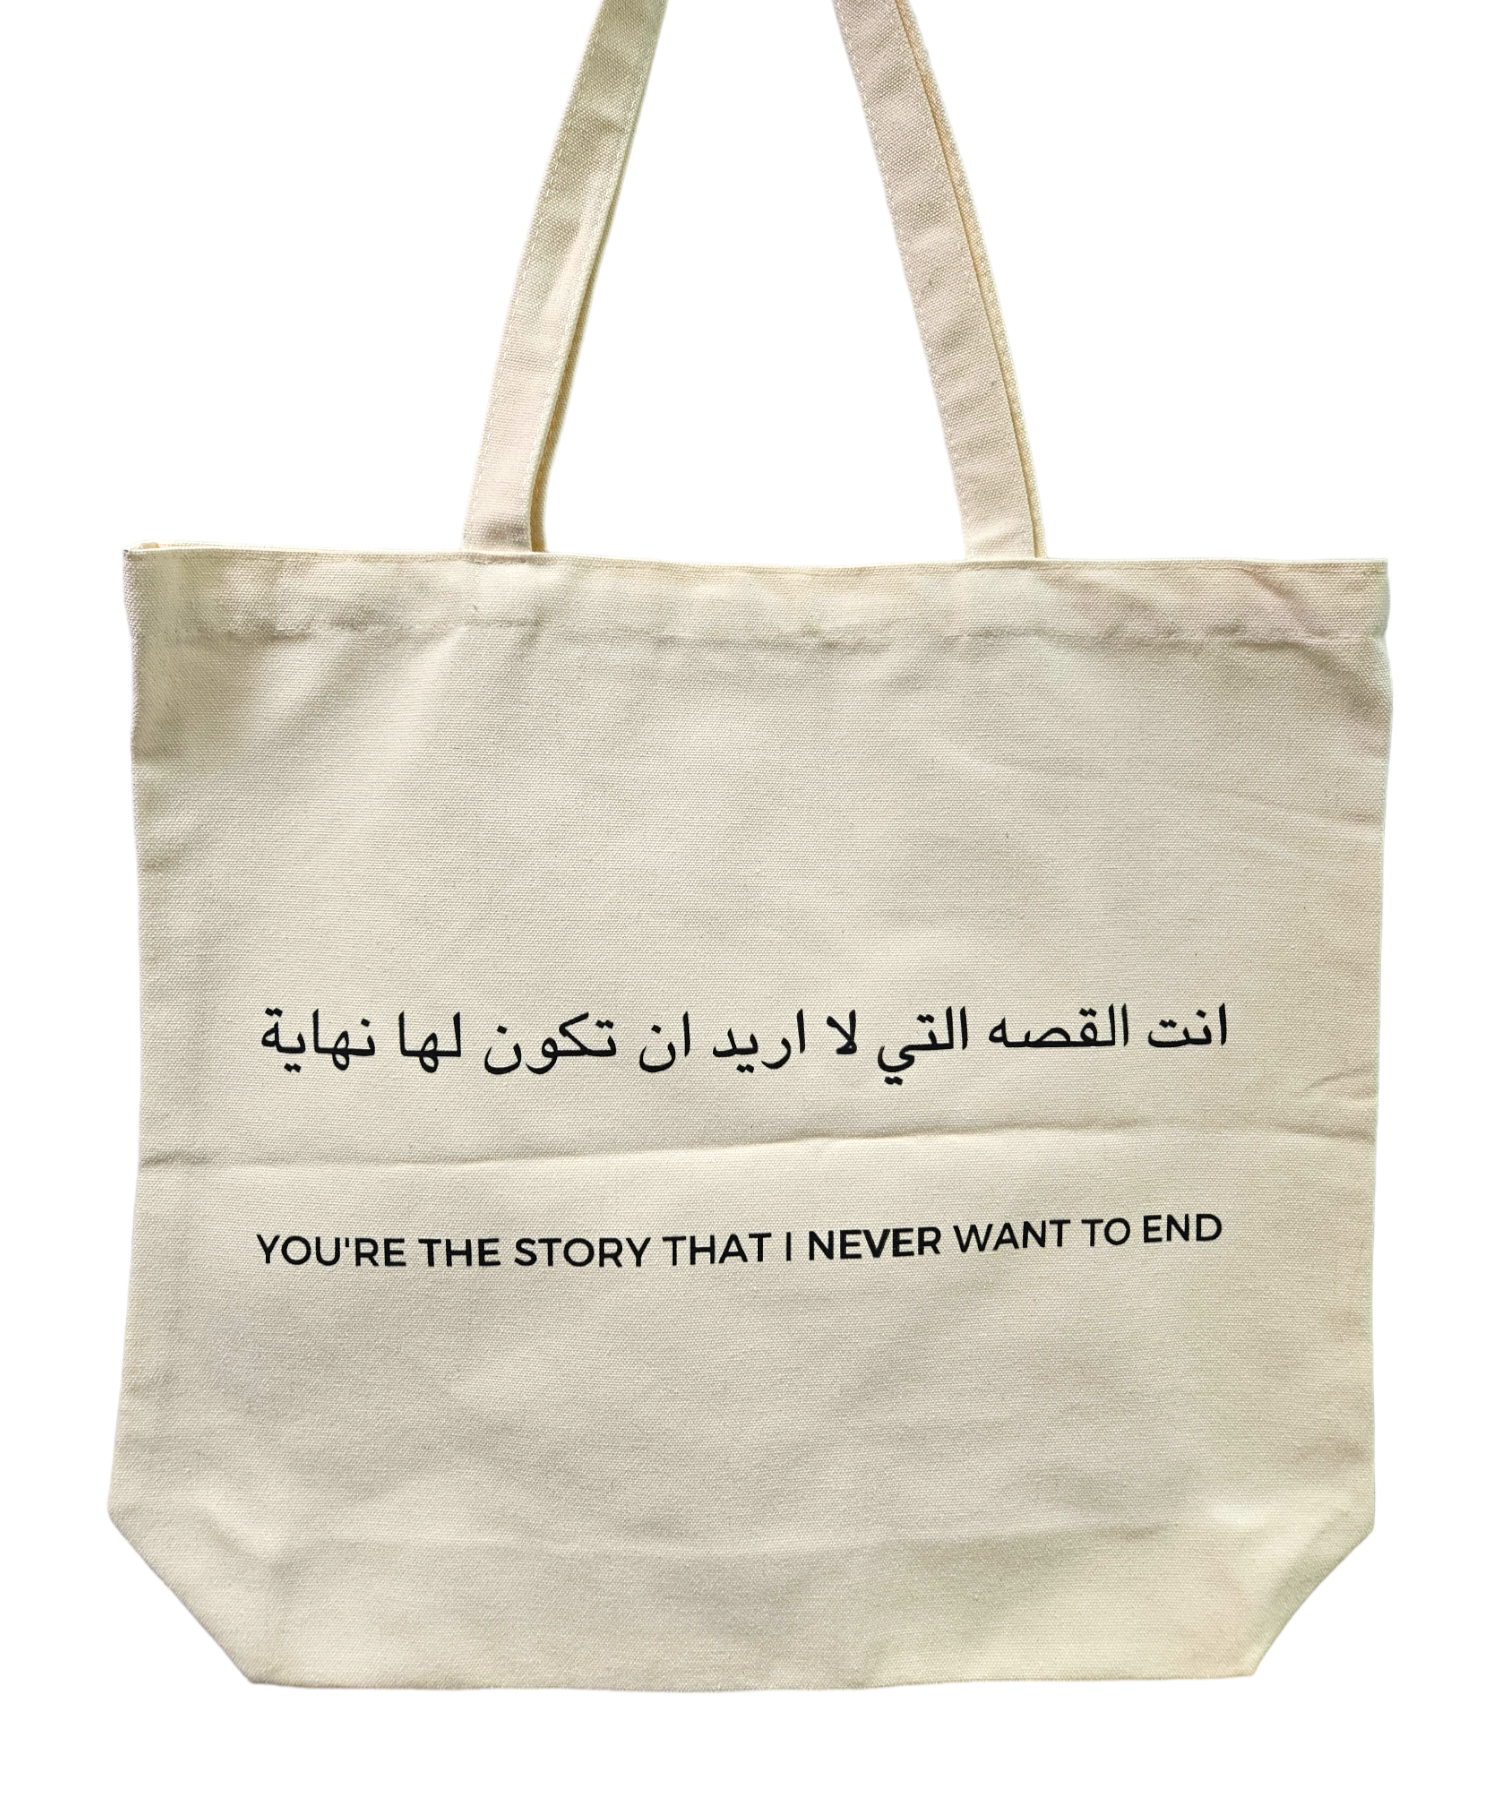 "You're The Story That I Never Want to End" Canvas Tote Bag